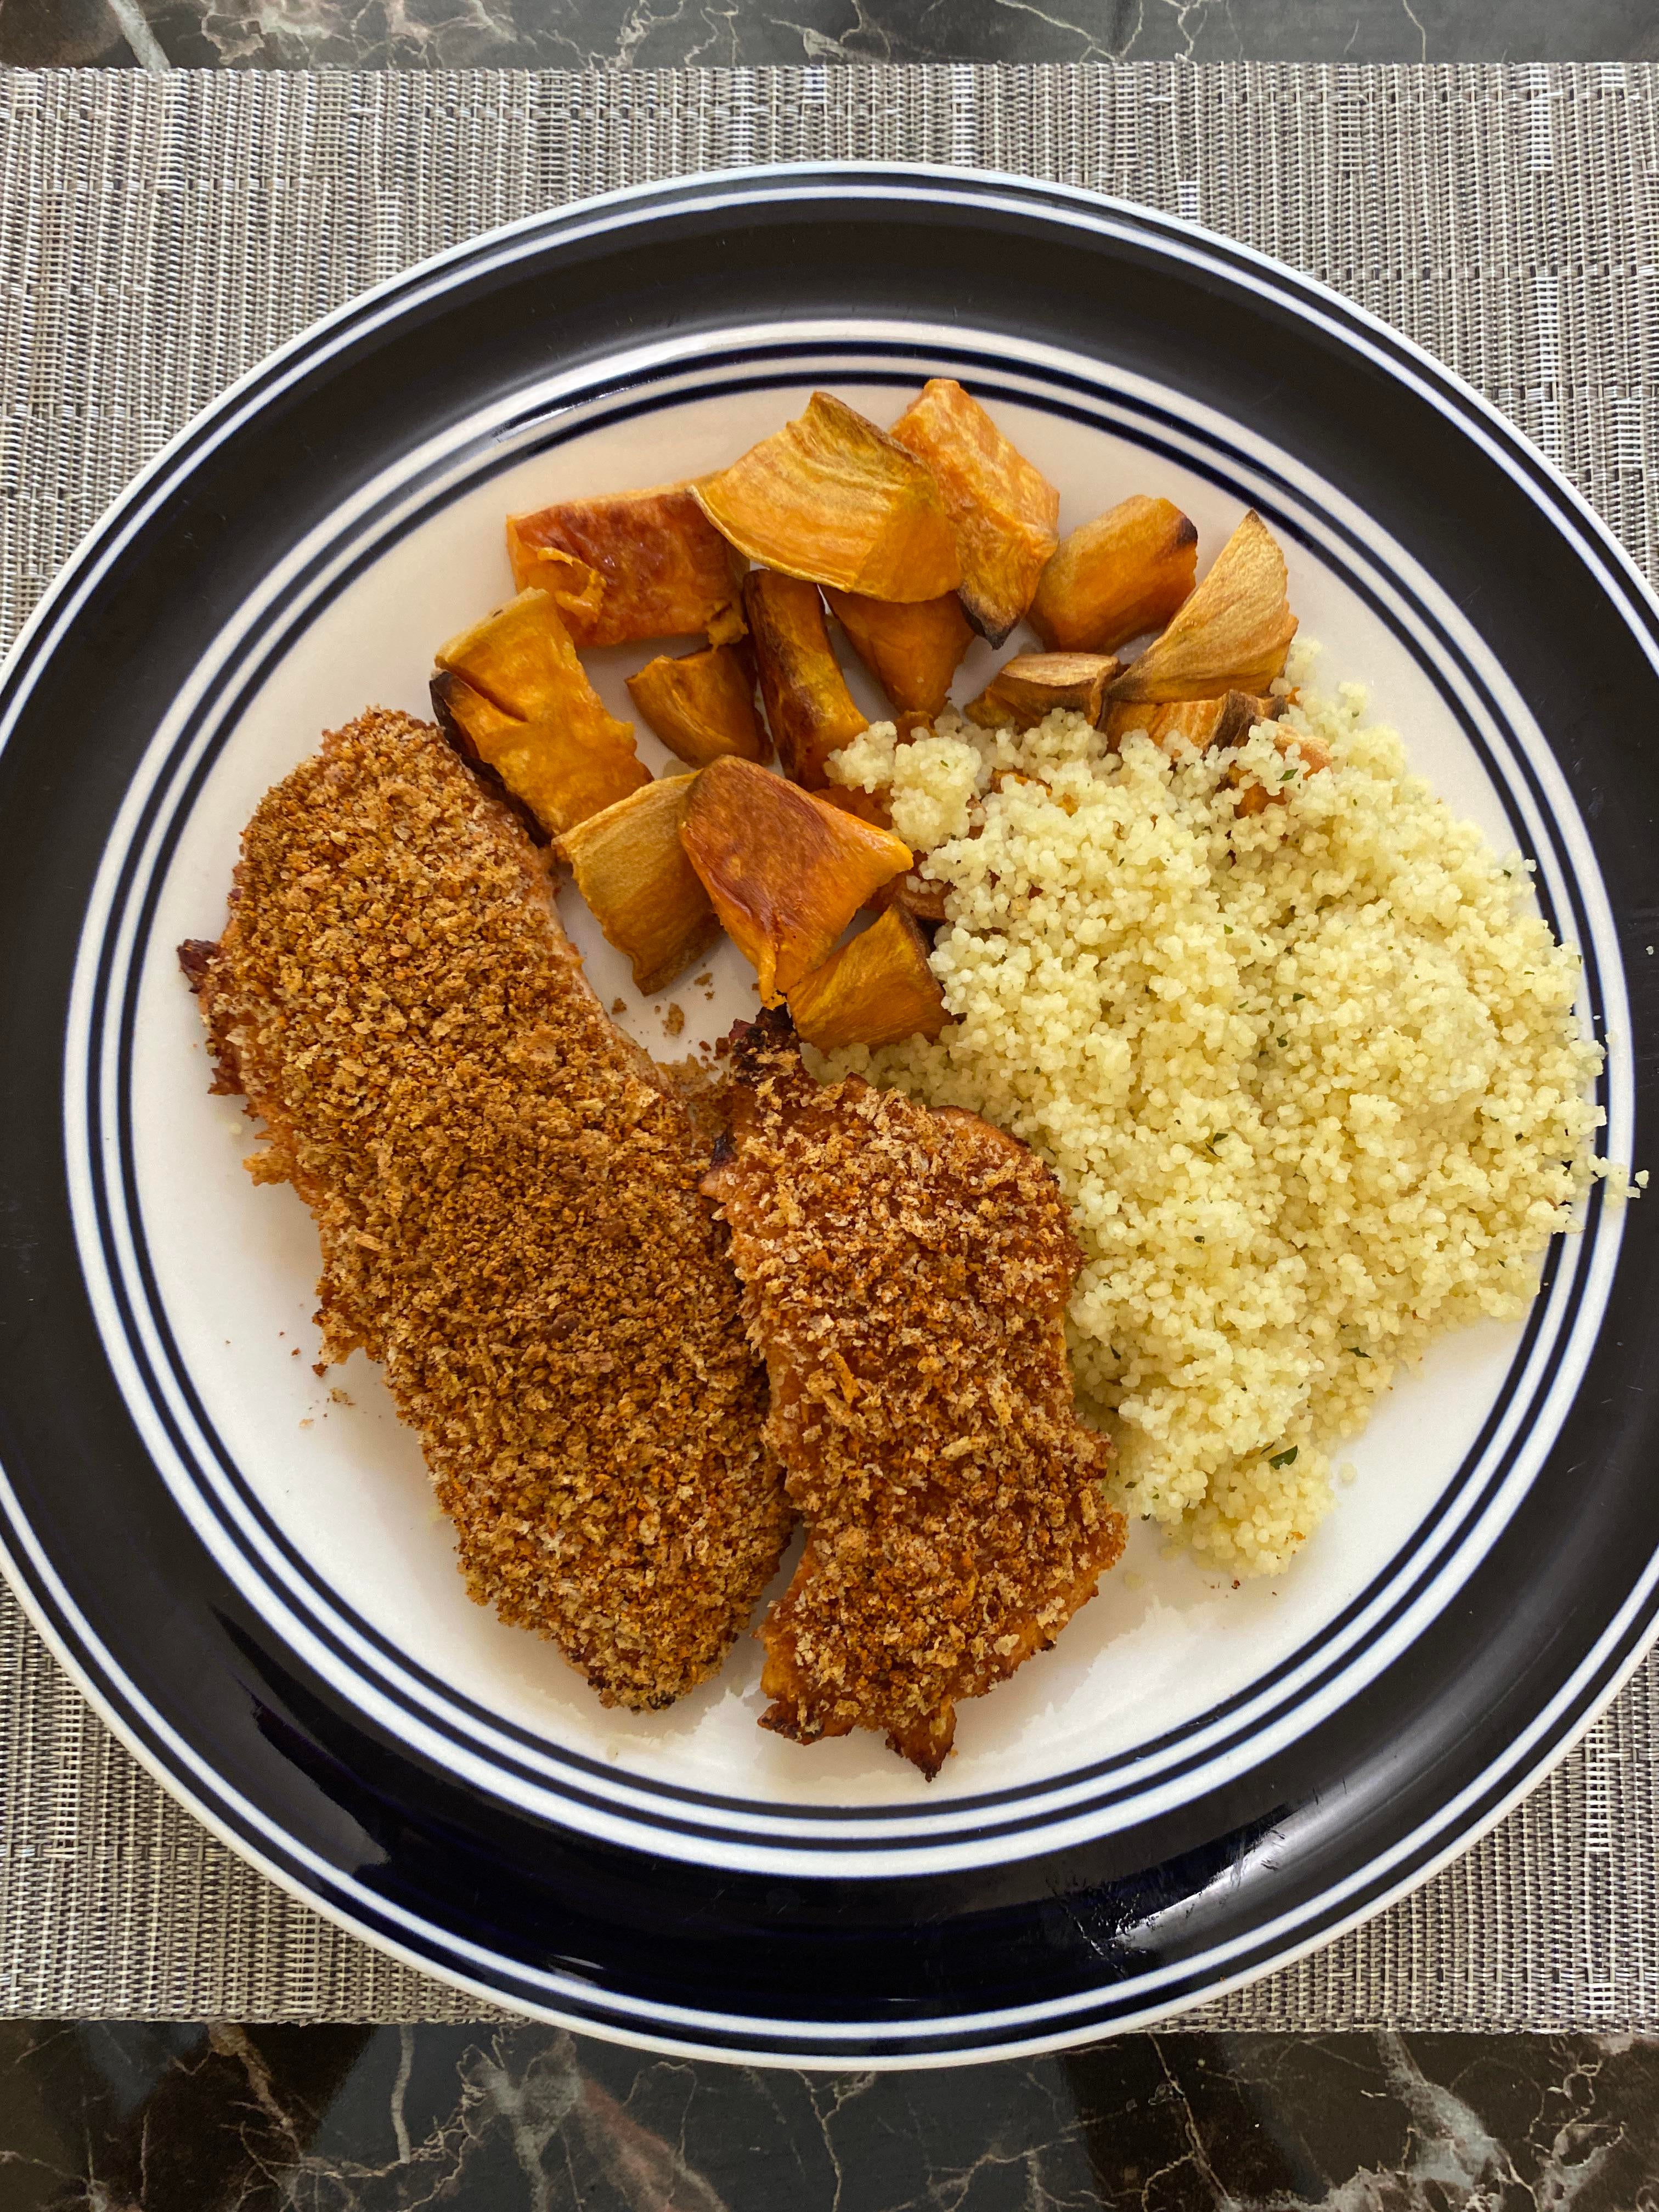 Parmesan crusted chicken, couscous, and roasted sweet potato! - Dining ...